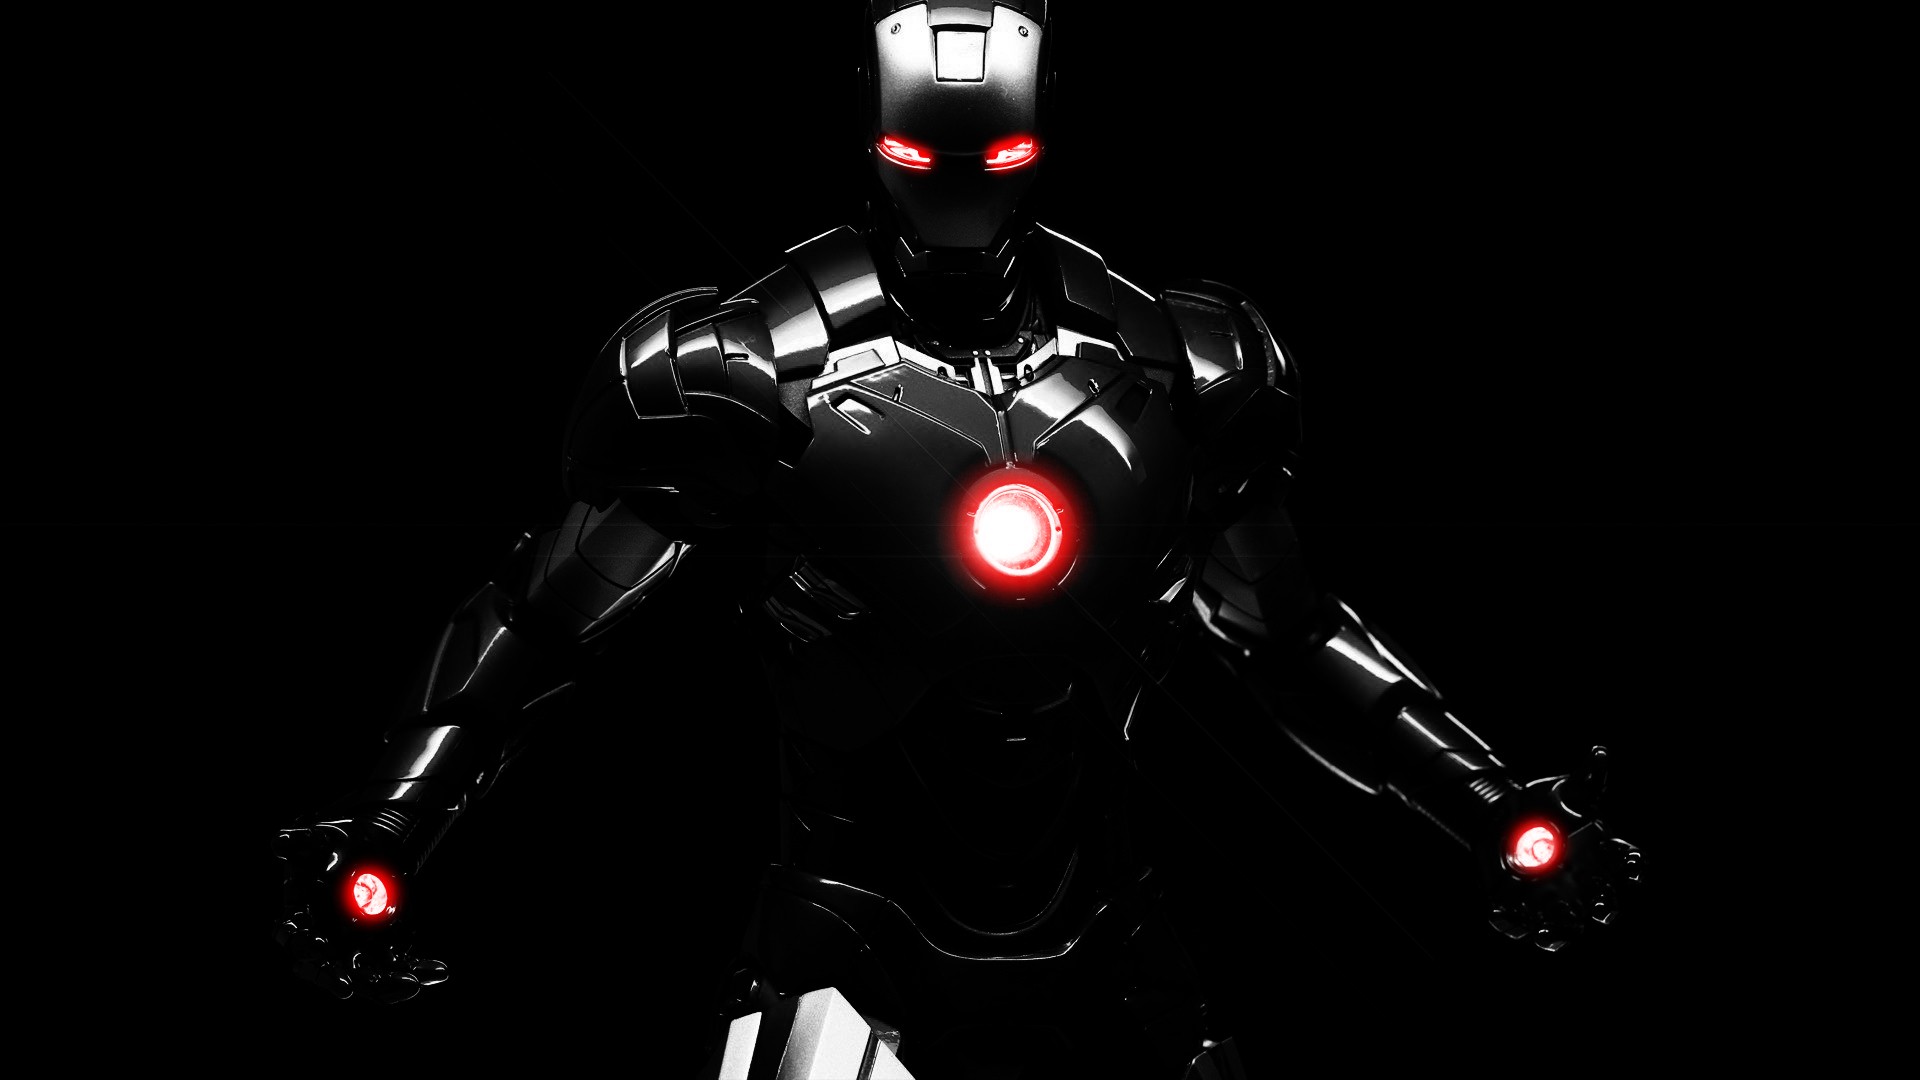 Cool Iron Man in Black in HD for Wallpaper - Wallpapers in HD